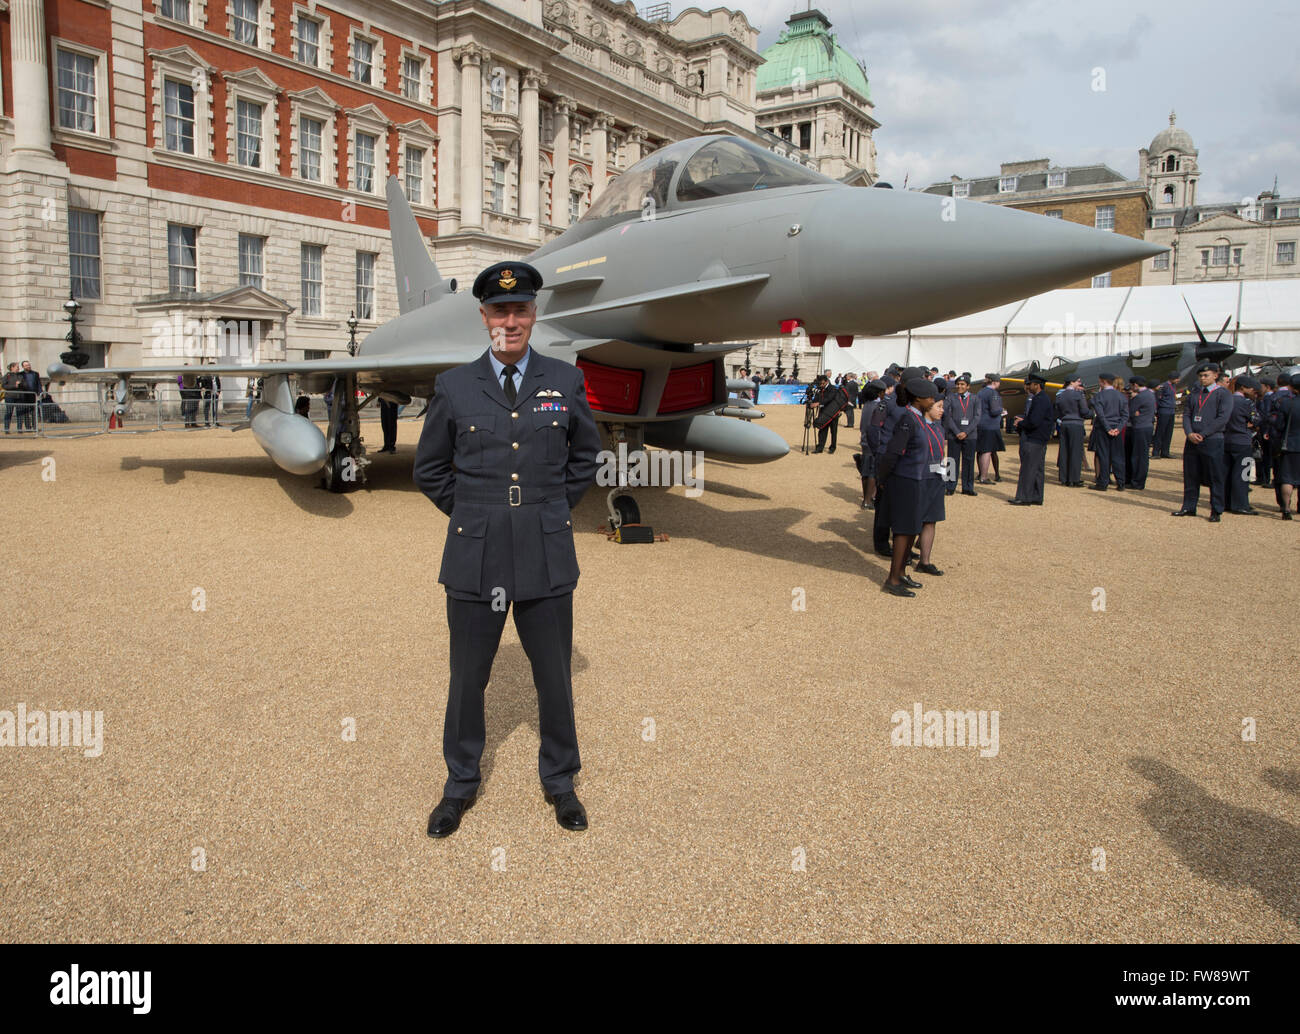 Horse Guards Parade, London, UK. 1st April, 2016. Andy Green, world landspeed record holder and RAF fighter pilot stands in front of a modern-day Eurofighter Typhoon, iconic second world war Spitfire fighter and world war 1 Sopwith Snipe in central London to celebrate the RAF Museum’s campaign offering members of the public the opportunity to have their name written on the wings of an RAF Red Arrows Hawk Jet that will fly through the 2017 display season. Credit:  Malcolm Park editorial / Alamy Live News. Stock Photo